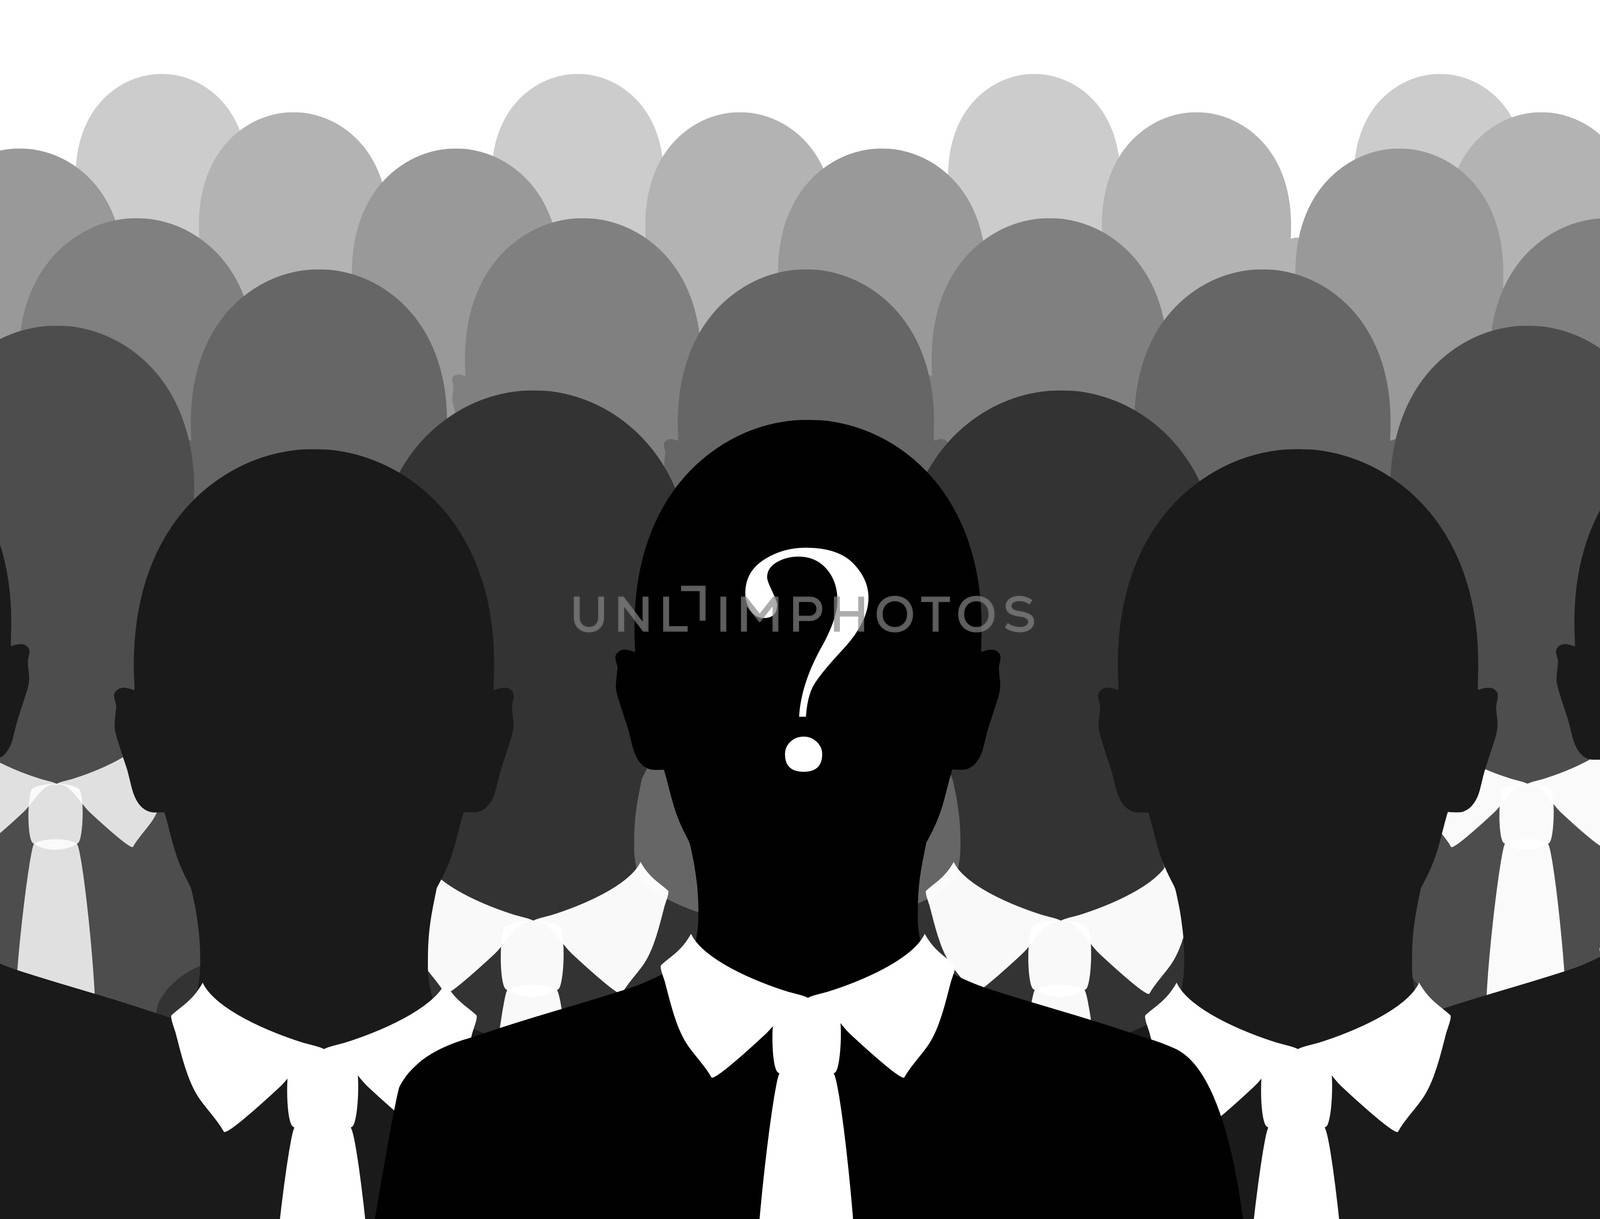 Illustration of a crowd of business people one with a question mark on their head